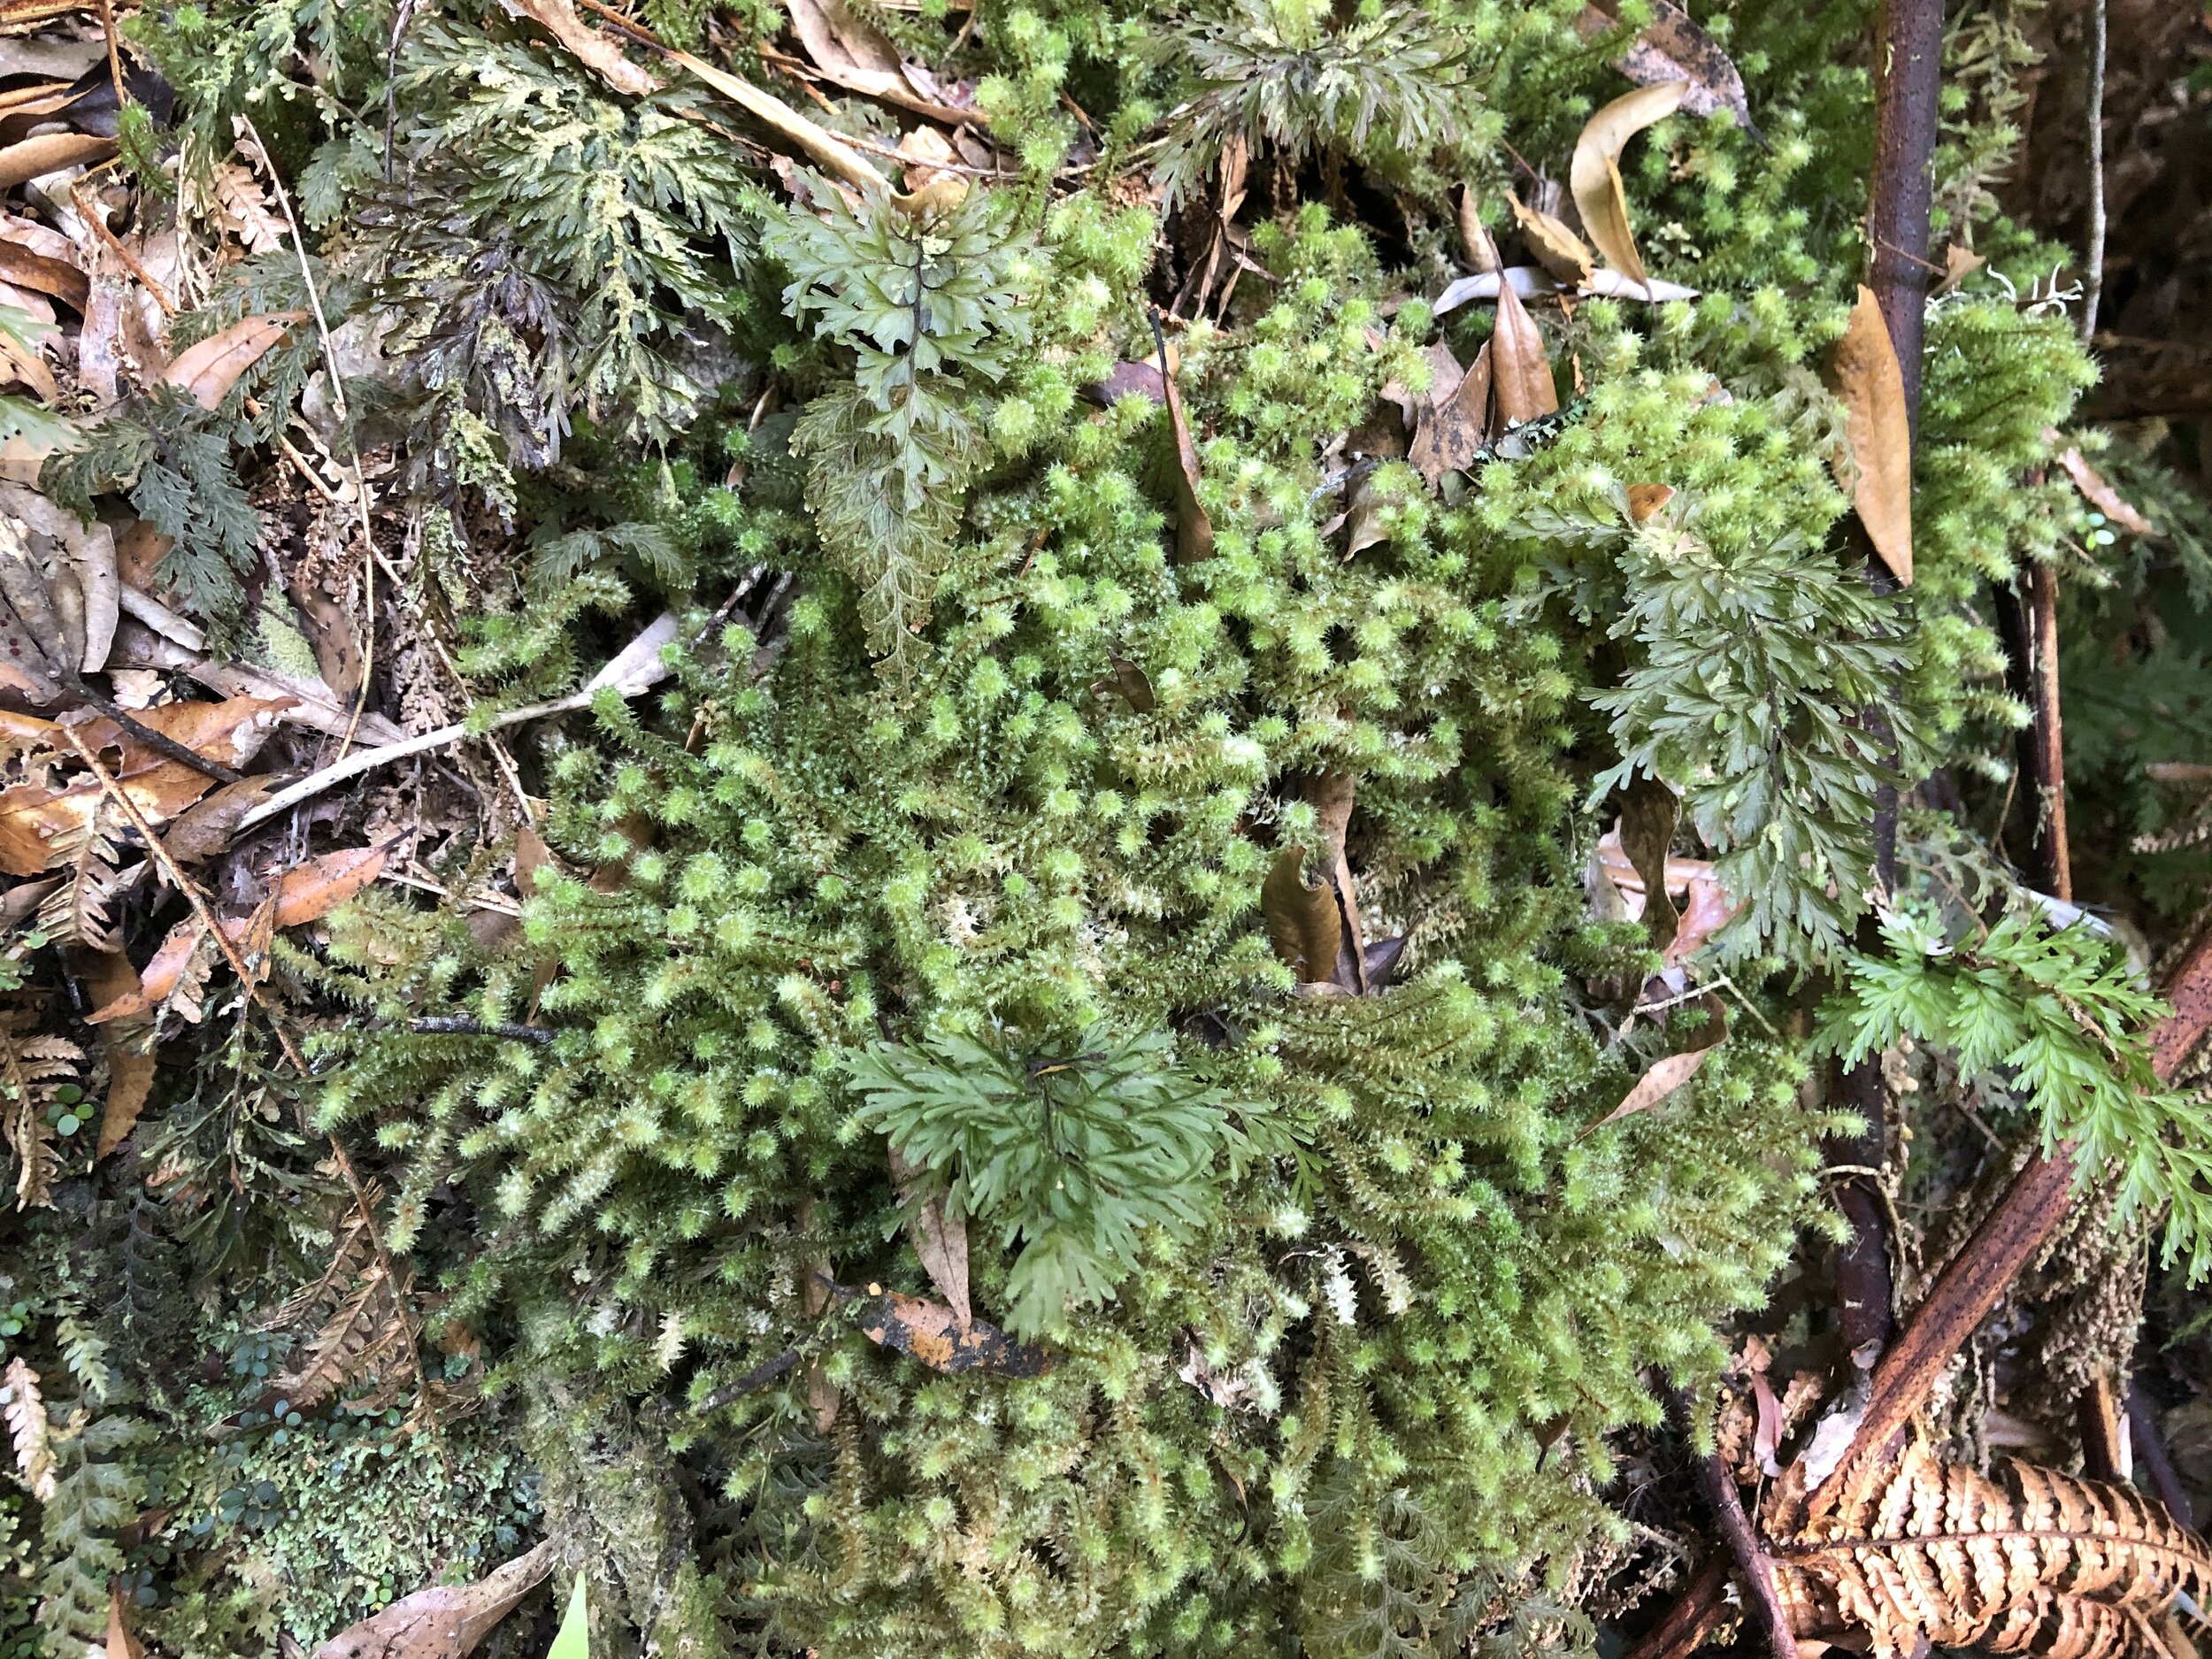  Mosses (next four images), with many more species, are also diverse in these kinds of habitats, as also are the liverworts, which include thalloid (next two images) and leafy forms (last two images).&nbsp; 